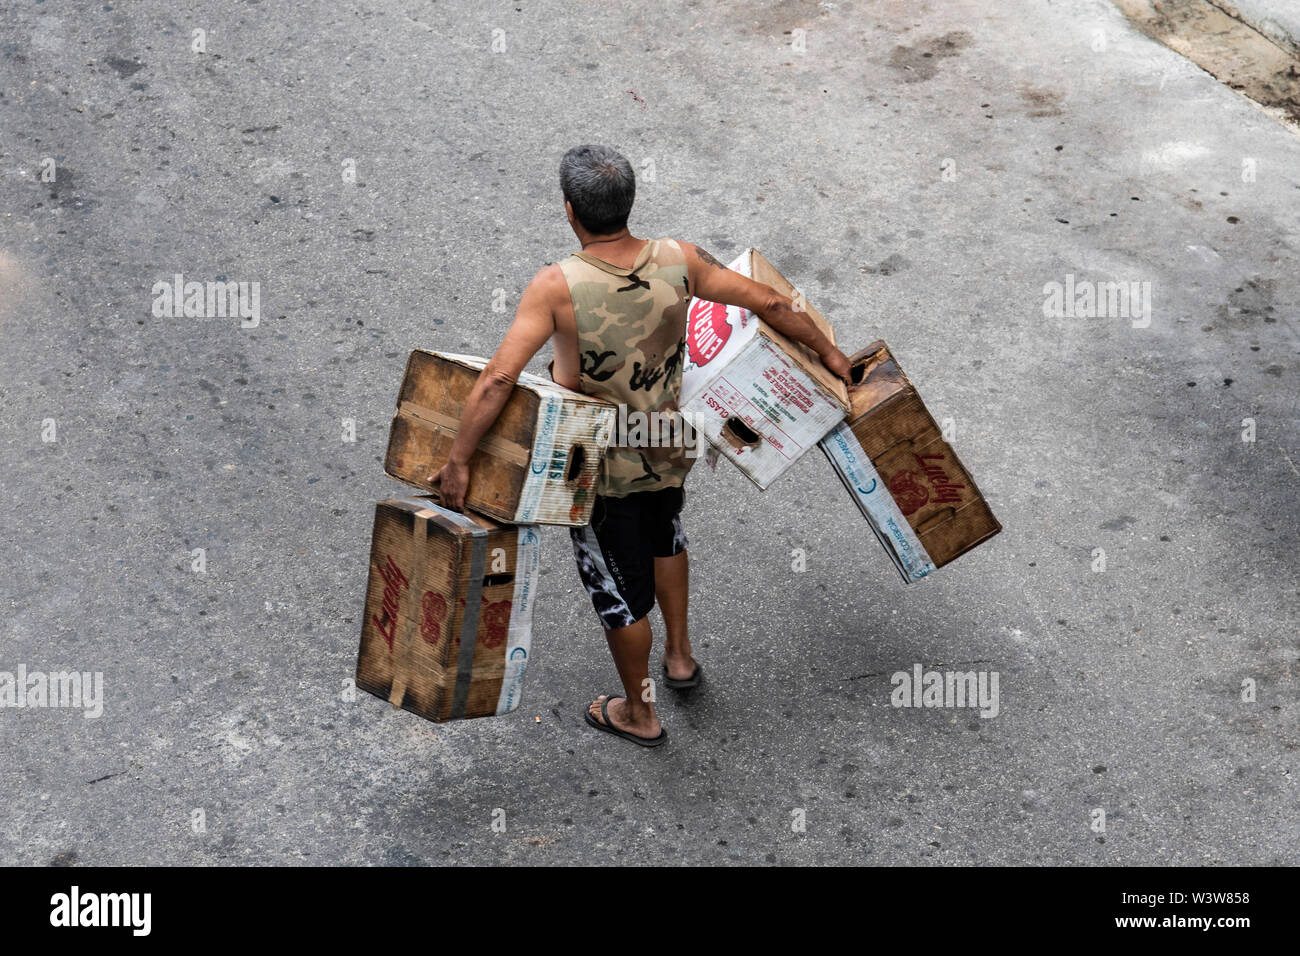 A man carrying crates and boxes walks down the street in Havana, Cuba Stock Photo